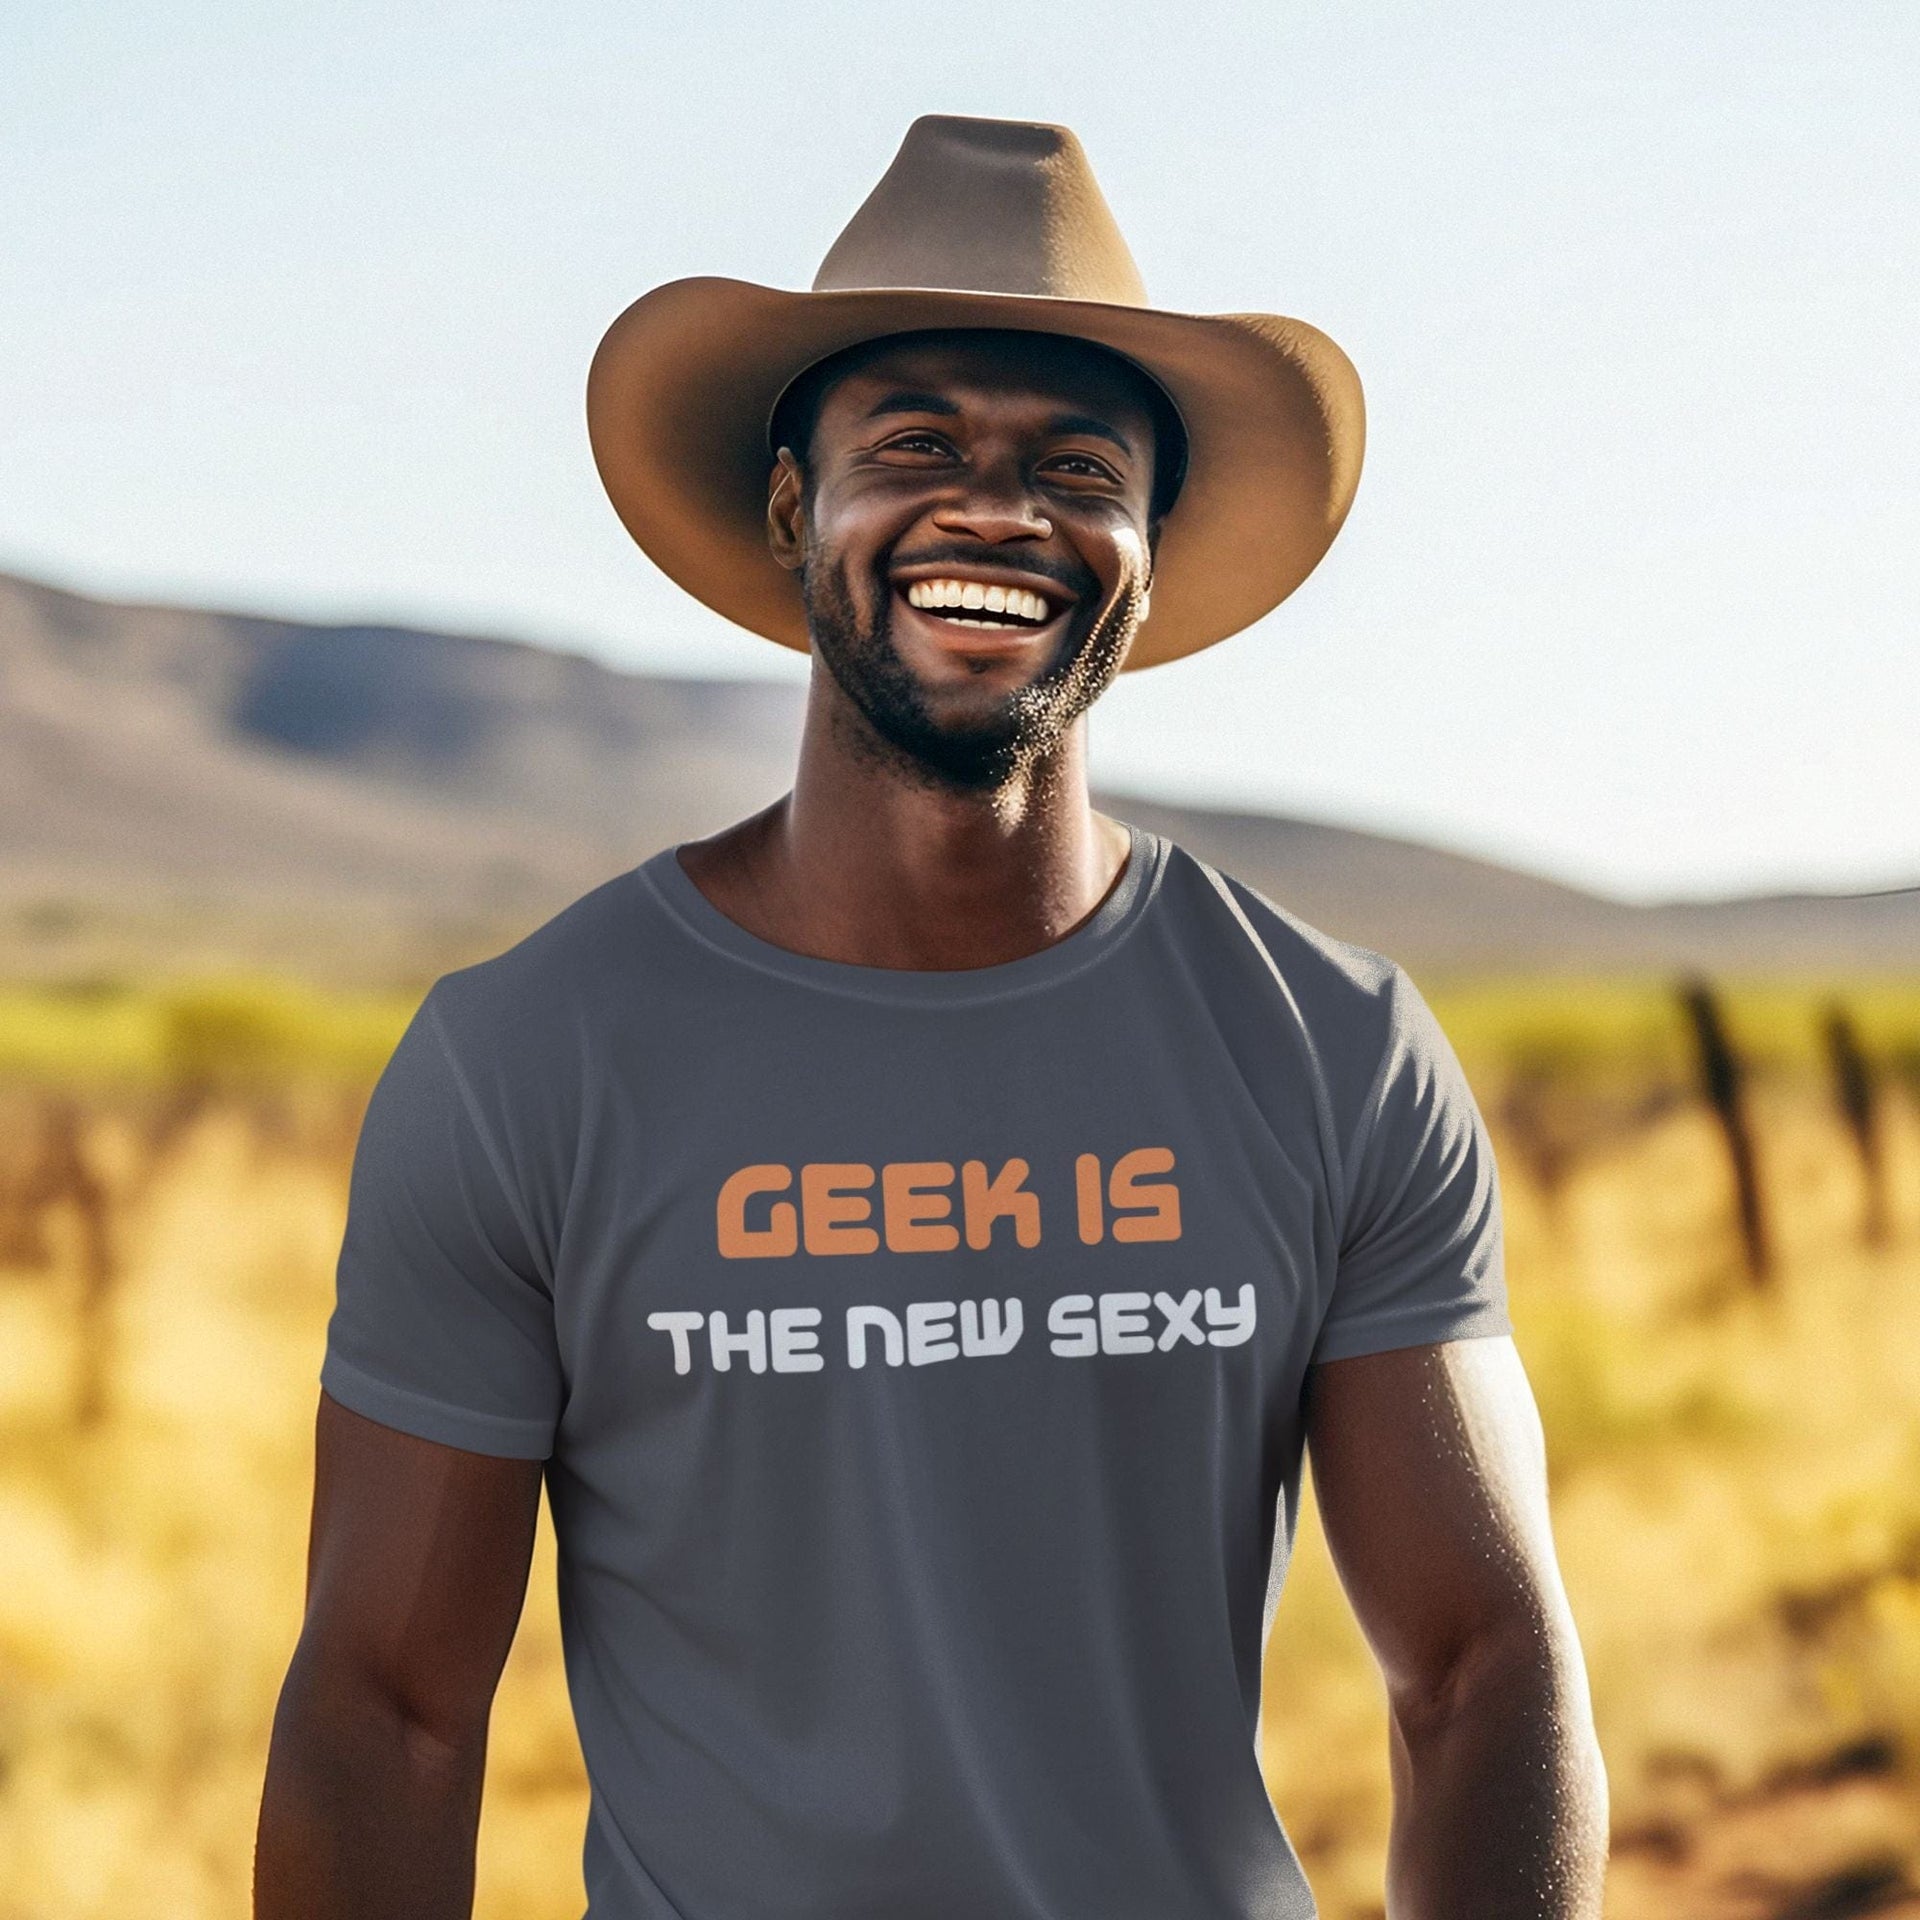 Geek is the New Sexy - Men's T-Shirt